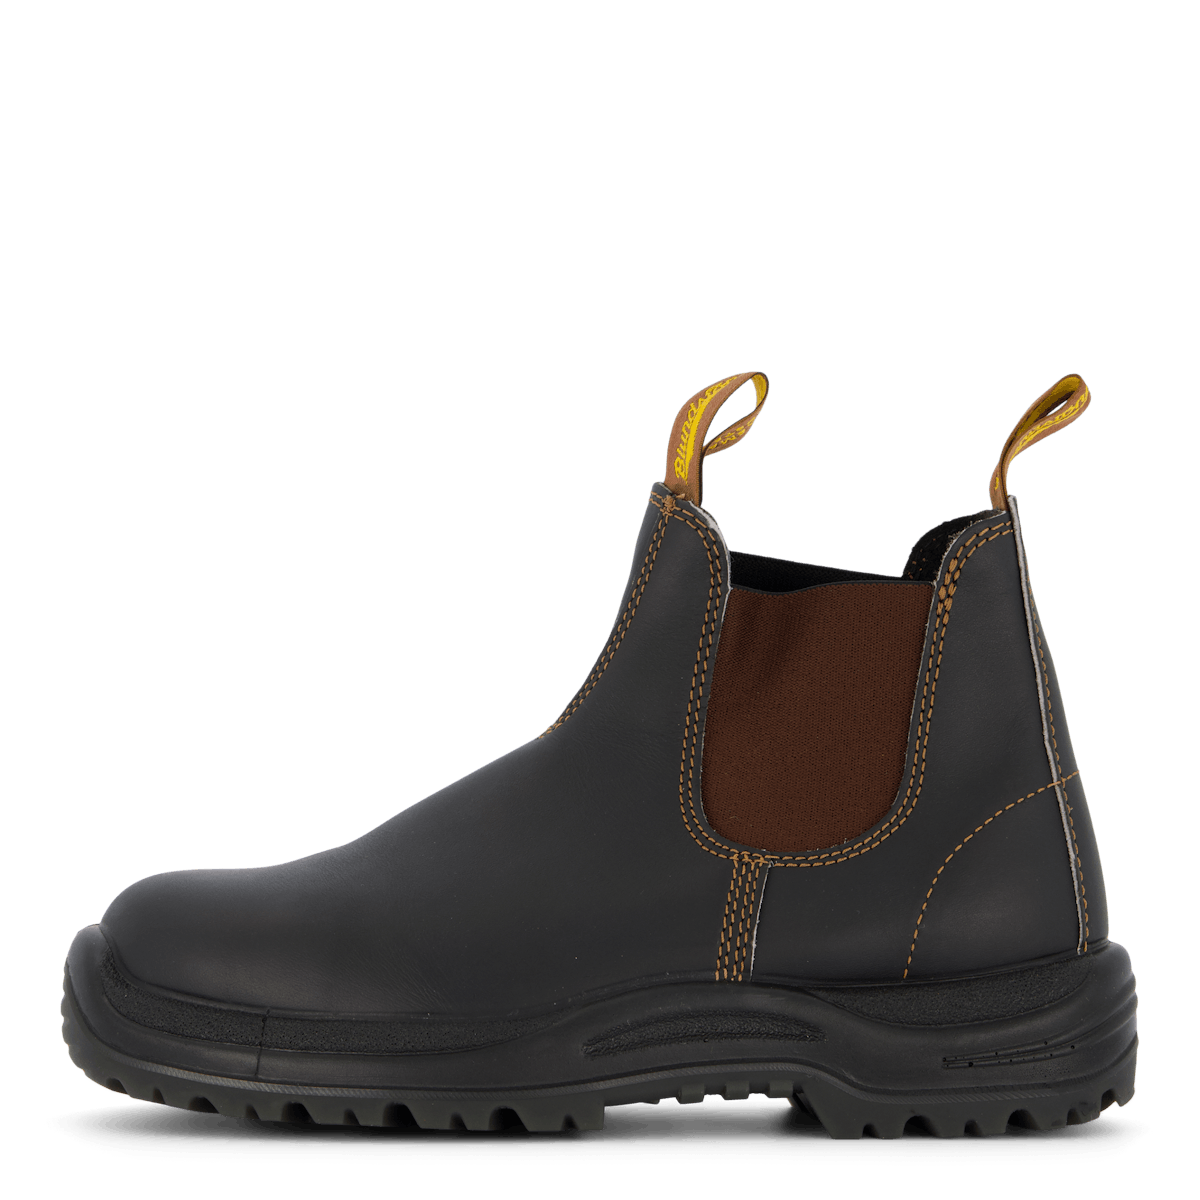 BL 192 Xtreme Safety Boot Stout Brown